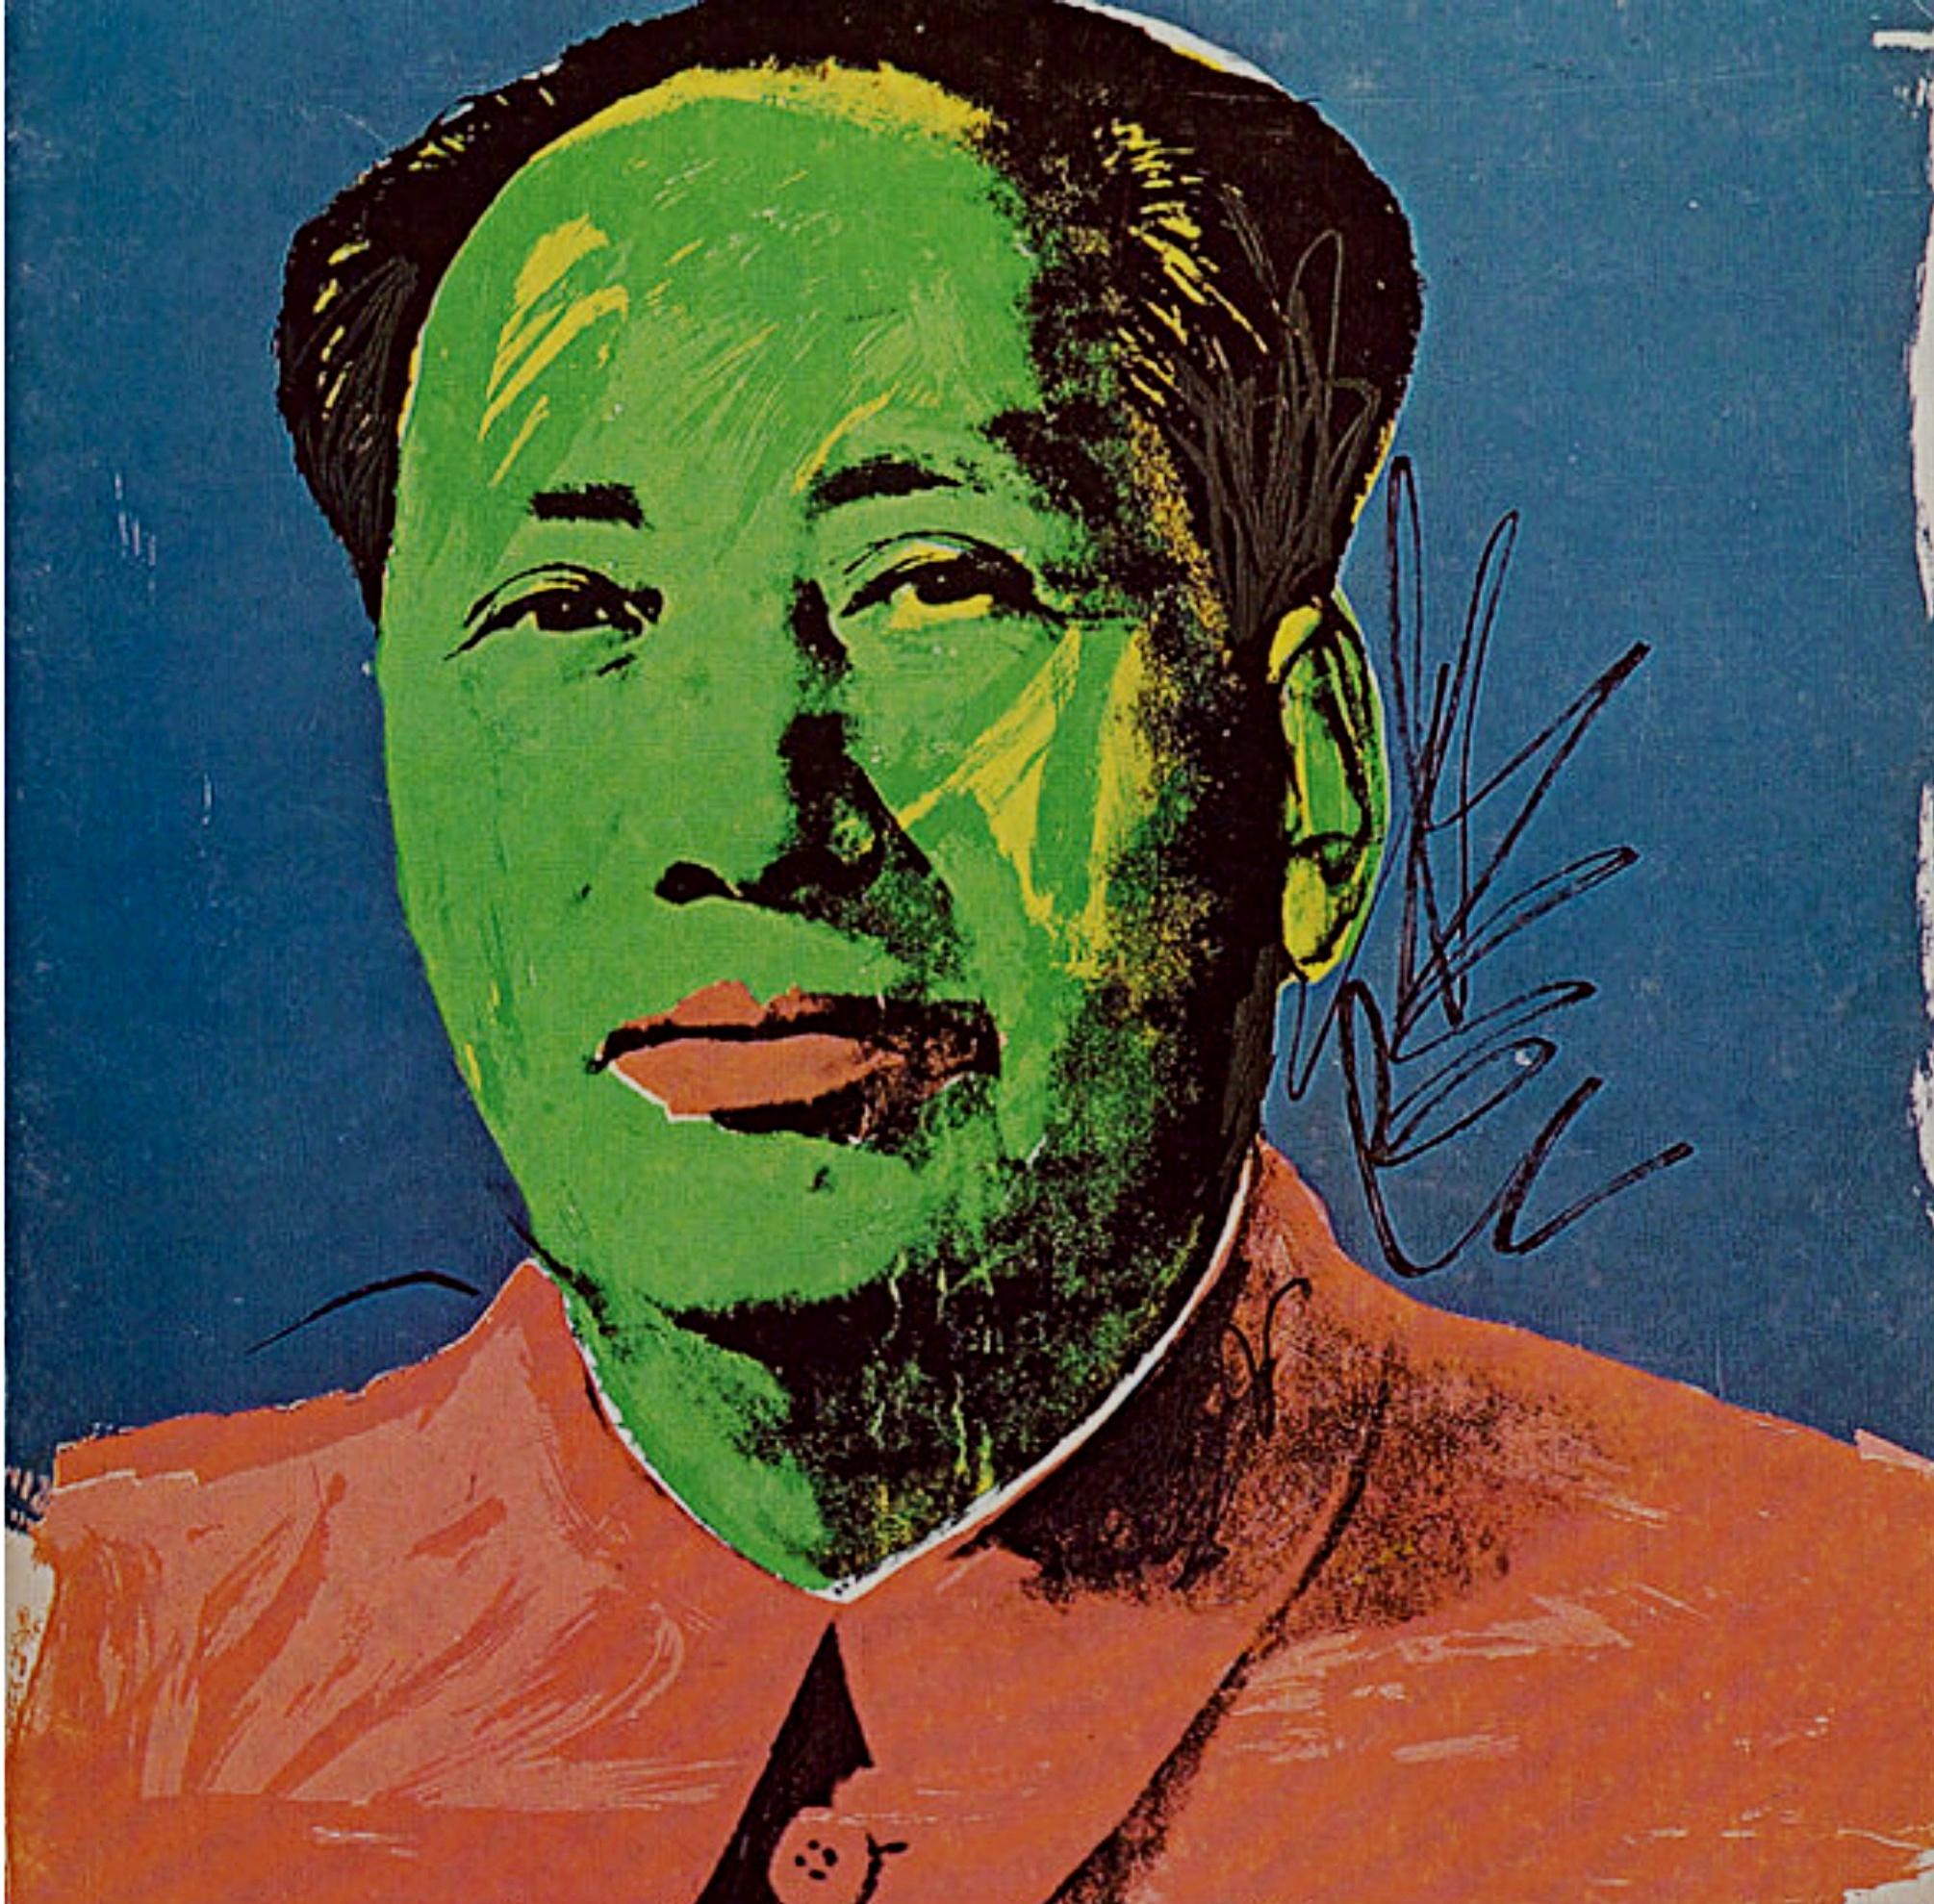 Chairman Mao (Mao Tse-Tung), vintage Leo Castelli exhibition fold-out card - Print by Andy Warhol